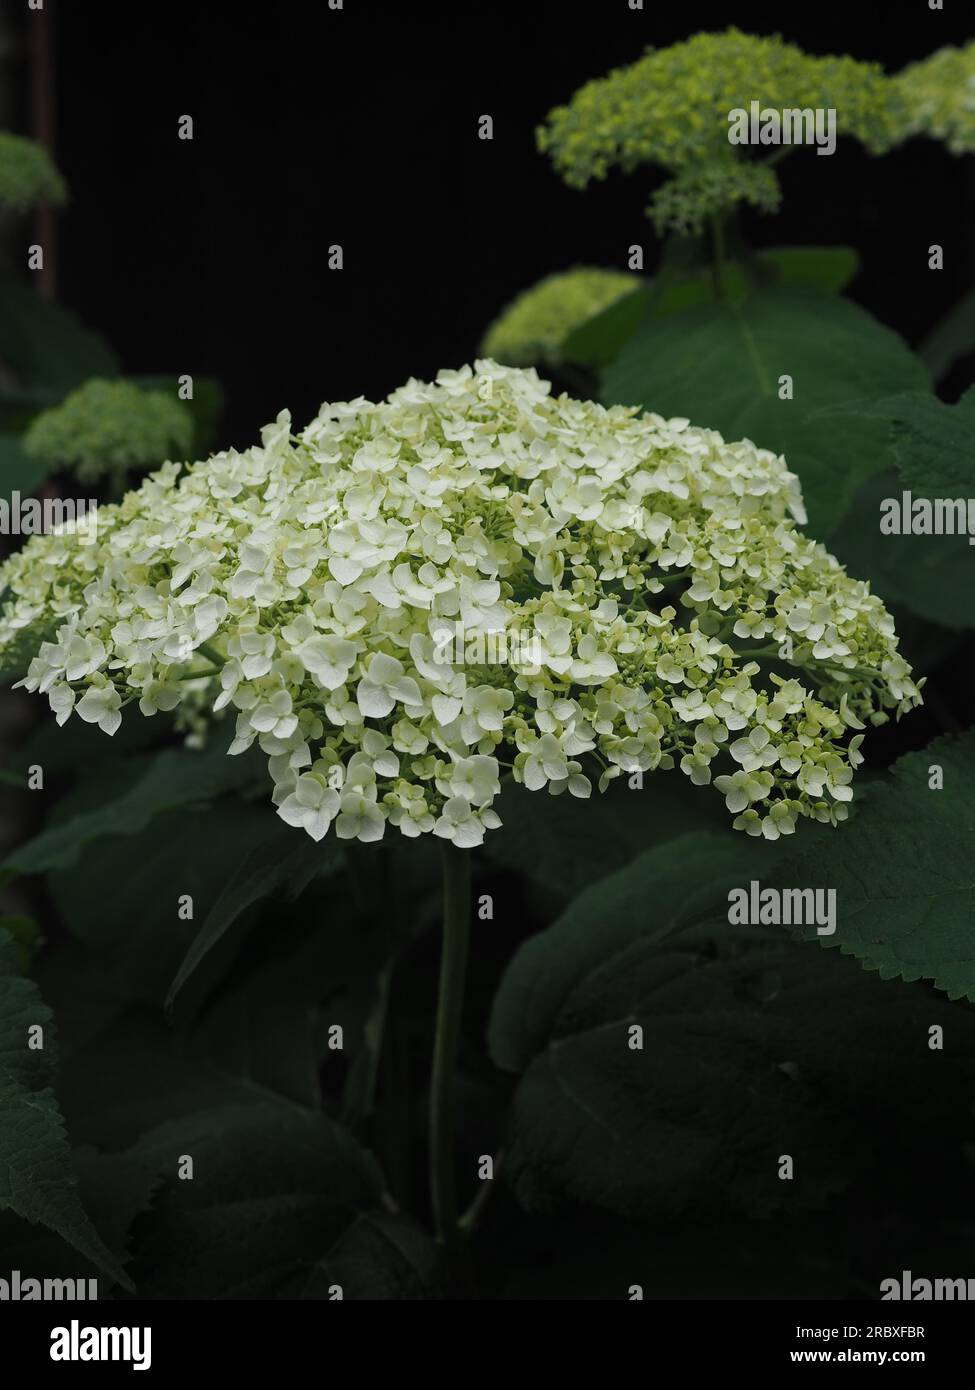 A flower of the mophead Hydrangea arborescens 'Incrediball' shining white and slightly green against a dark shady background in a British garden Stock Photo